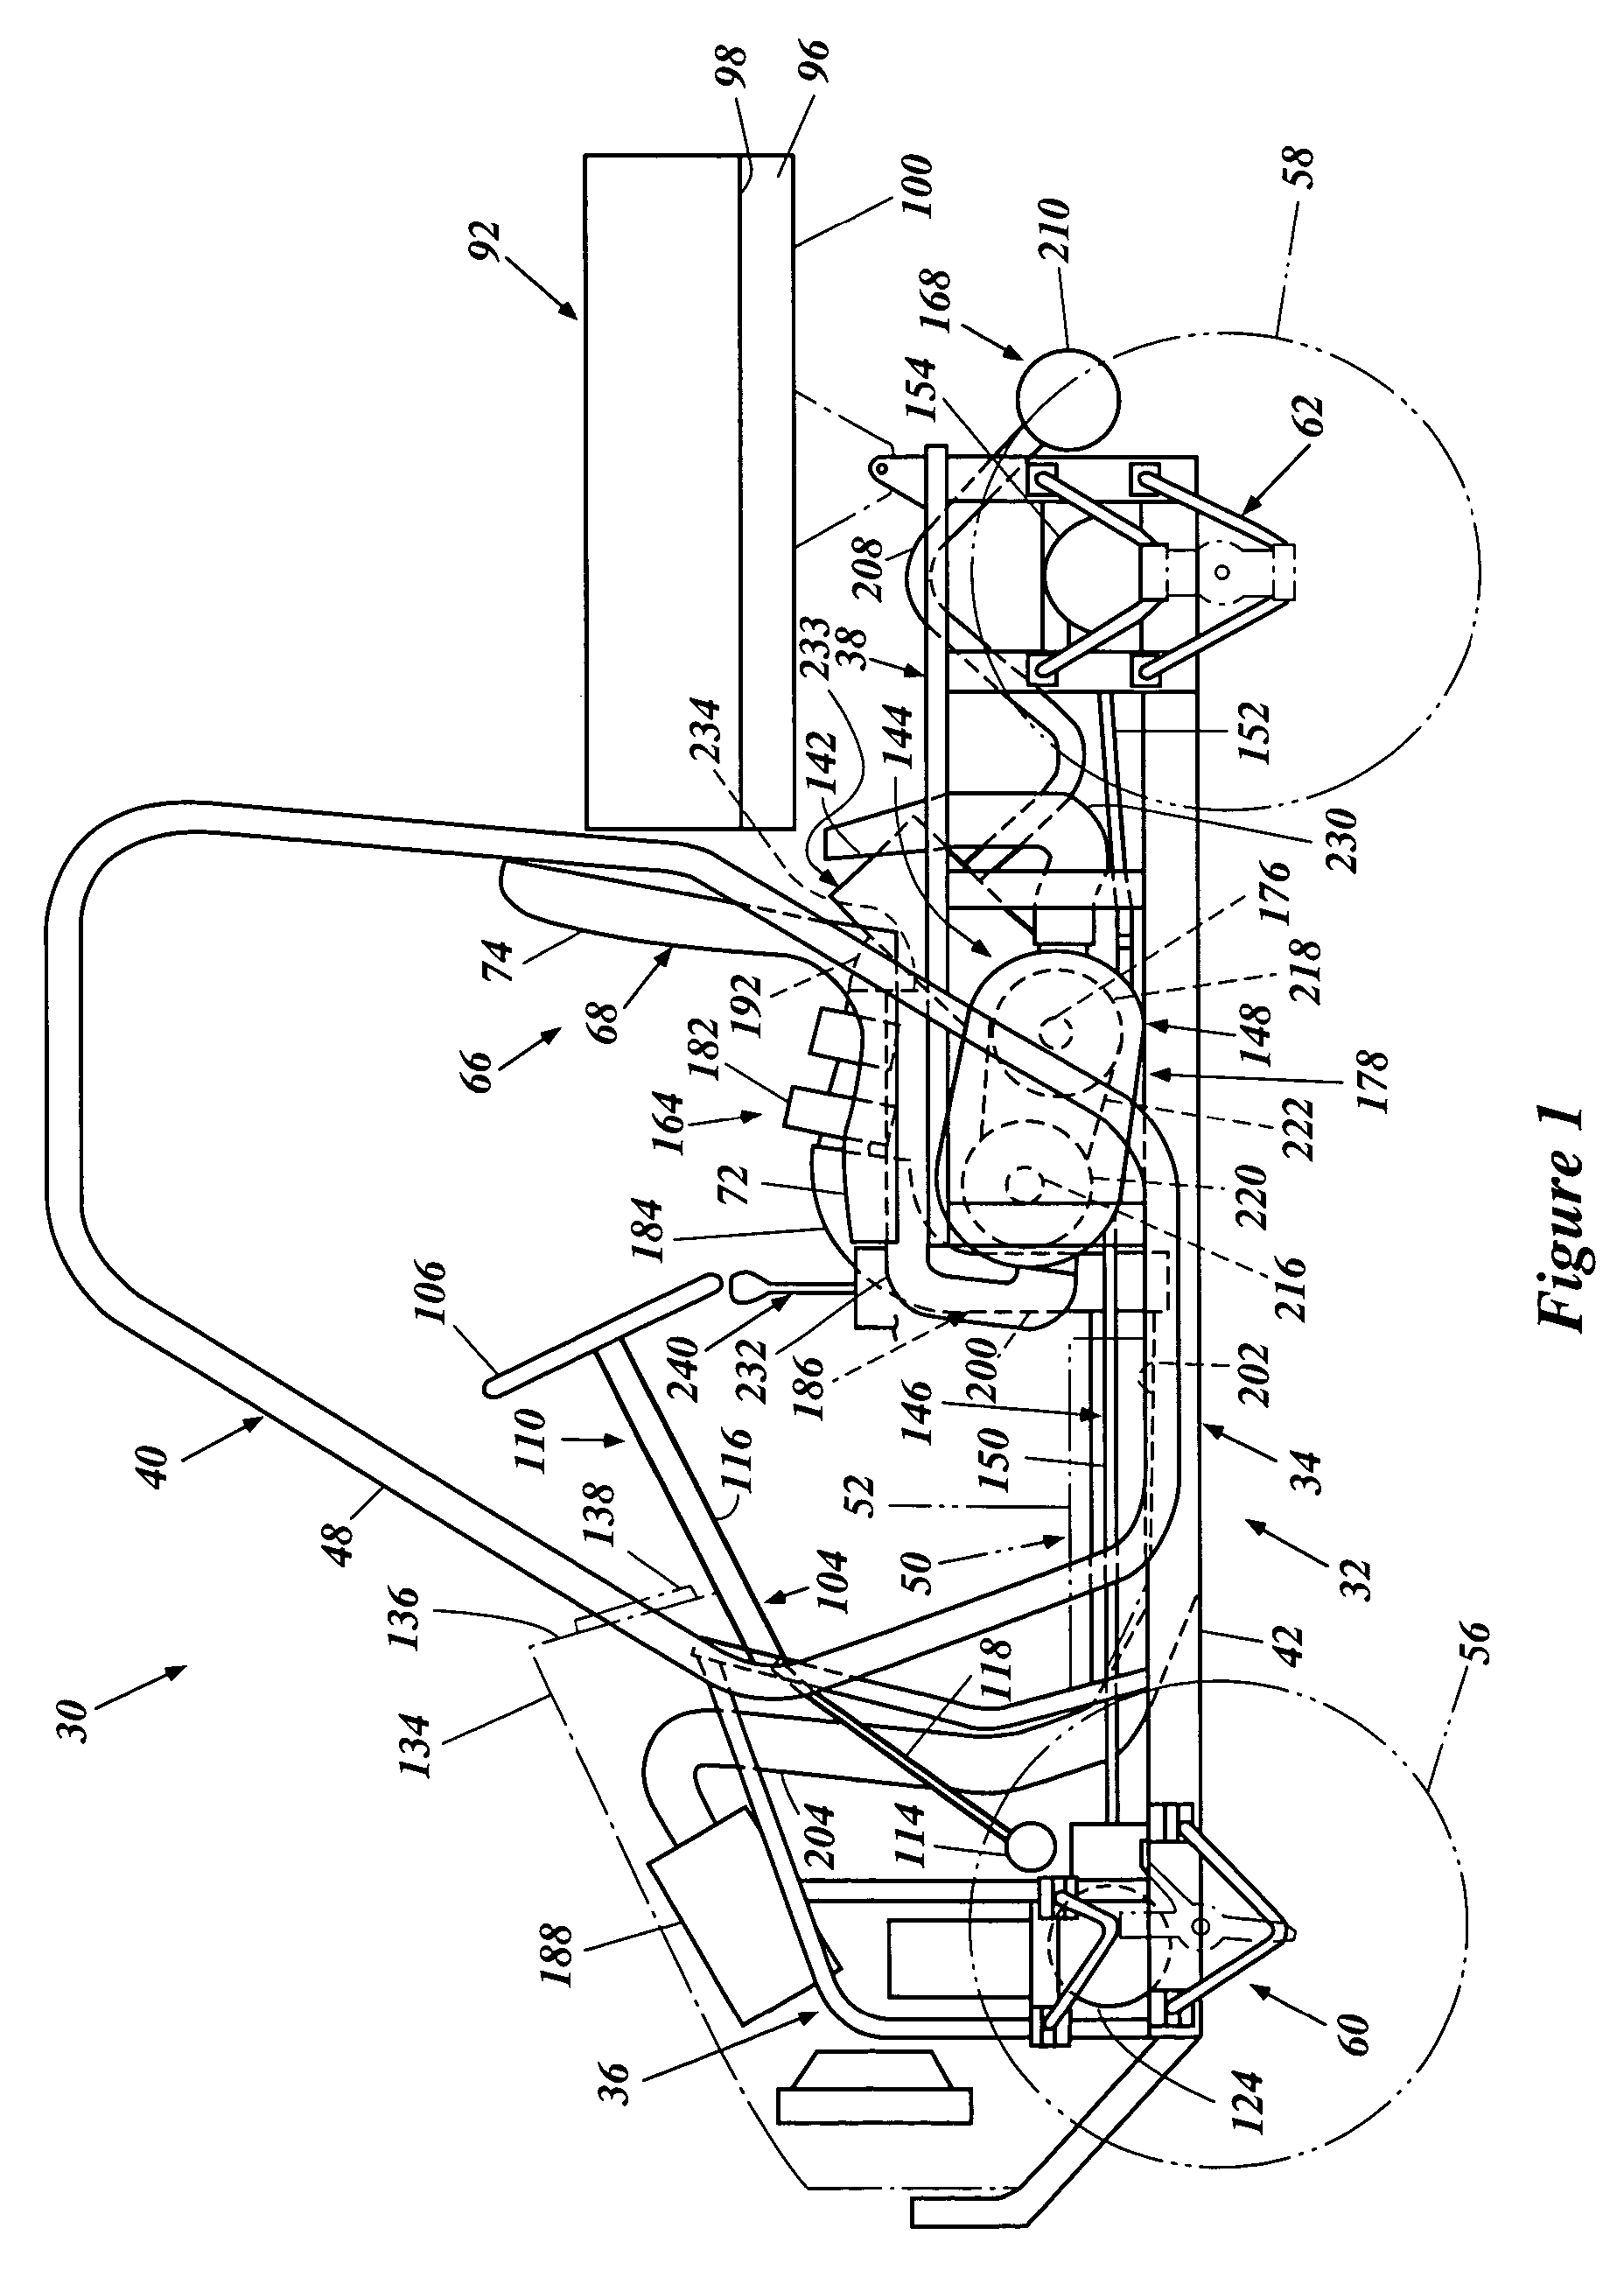 Steering system for off-road vehicle